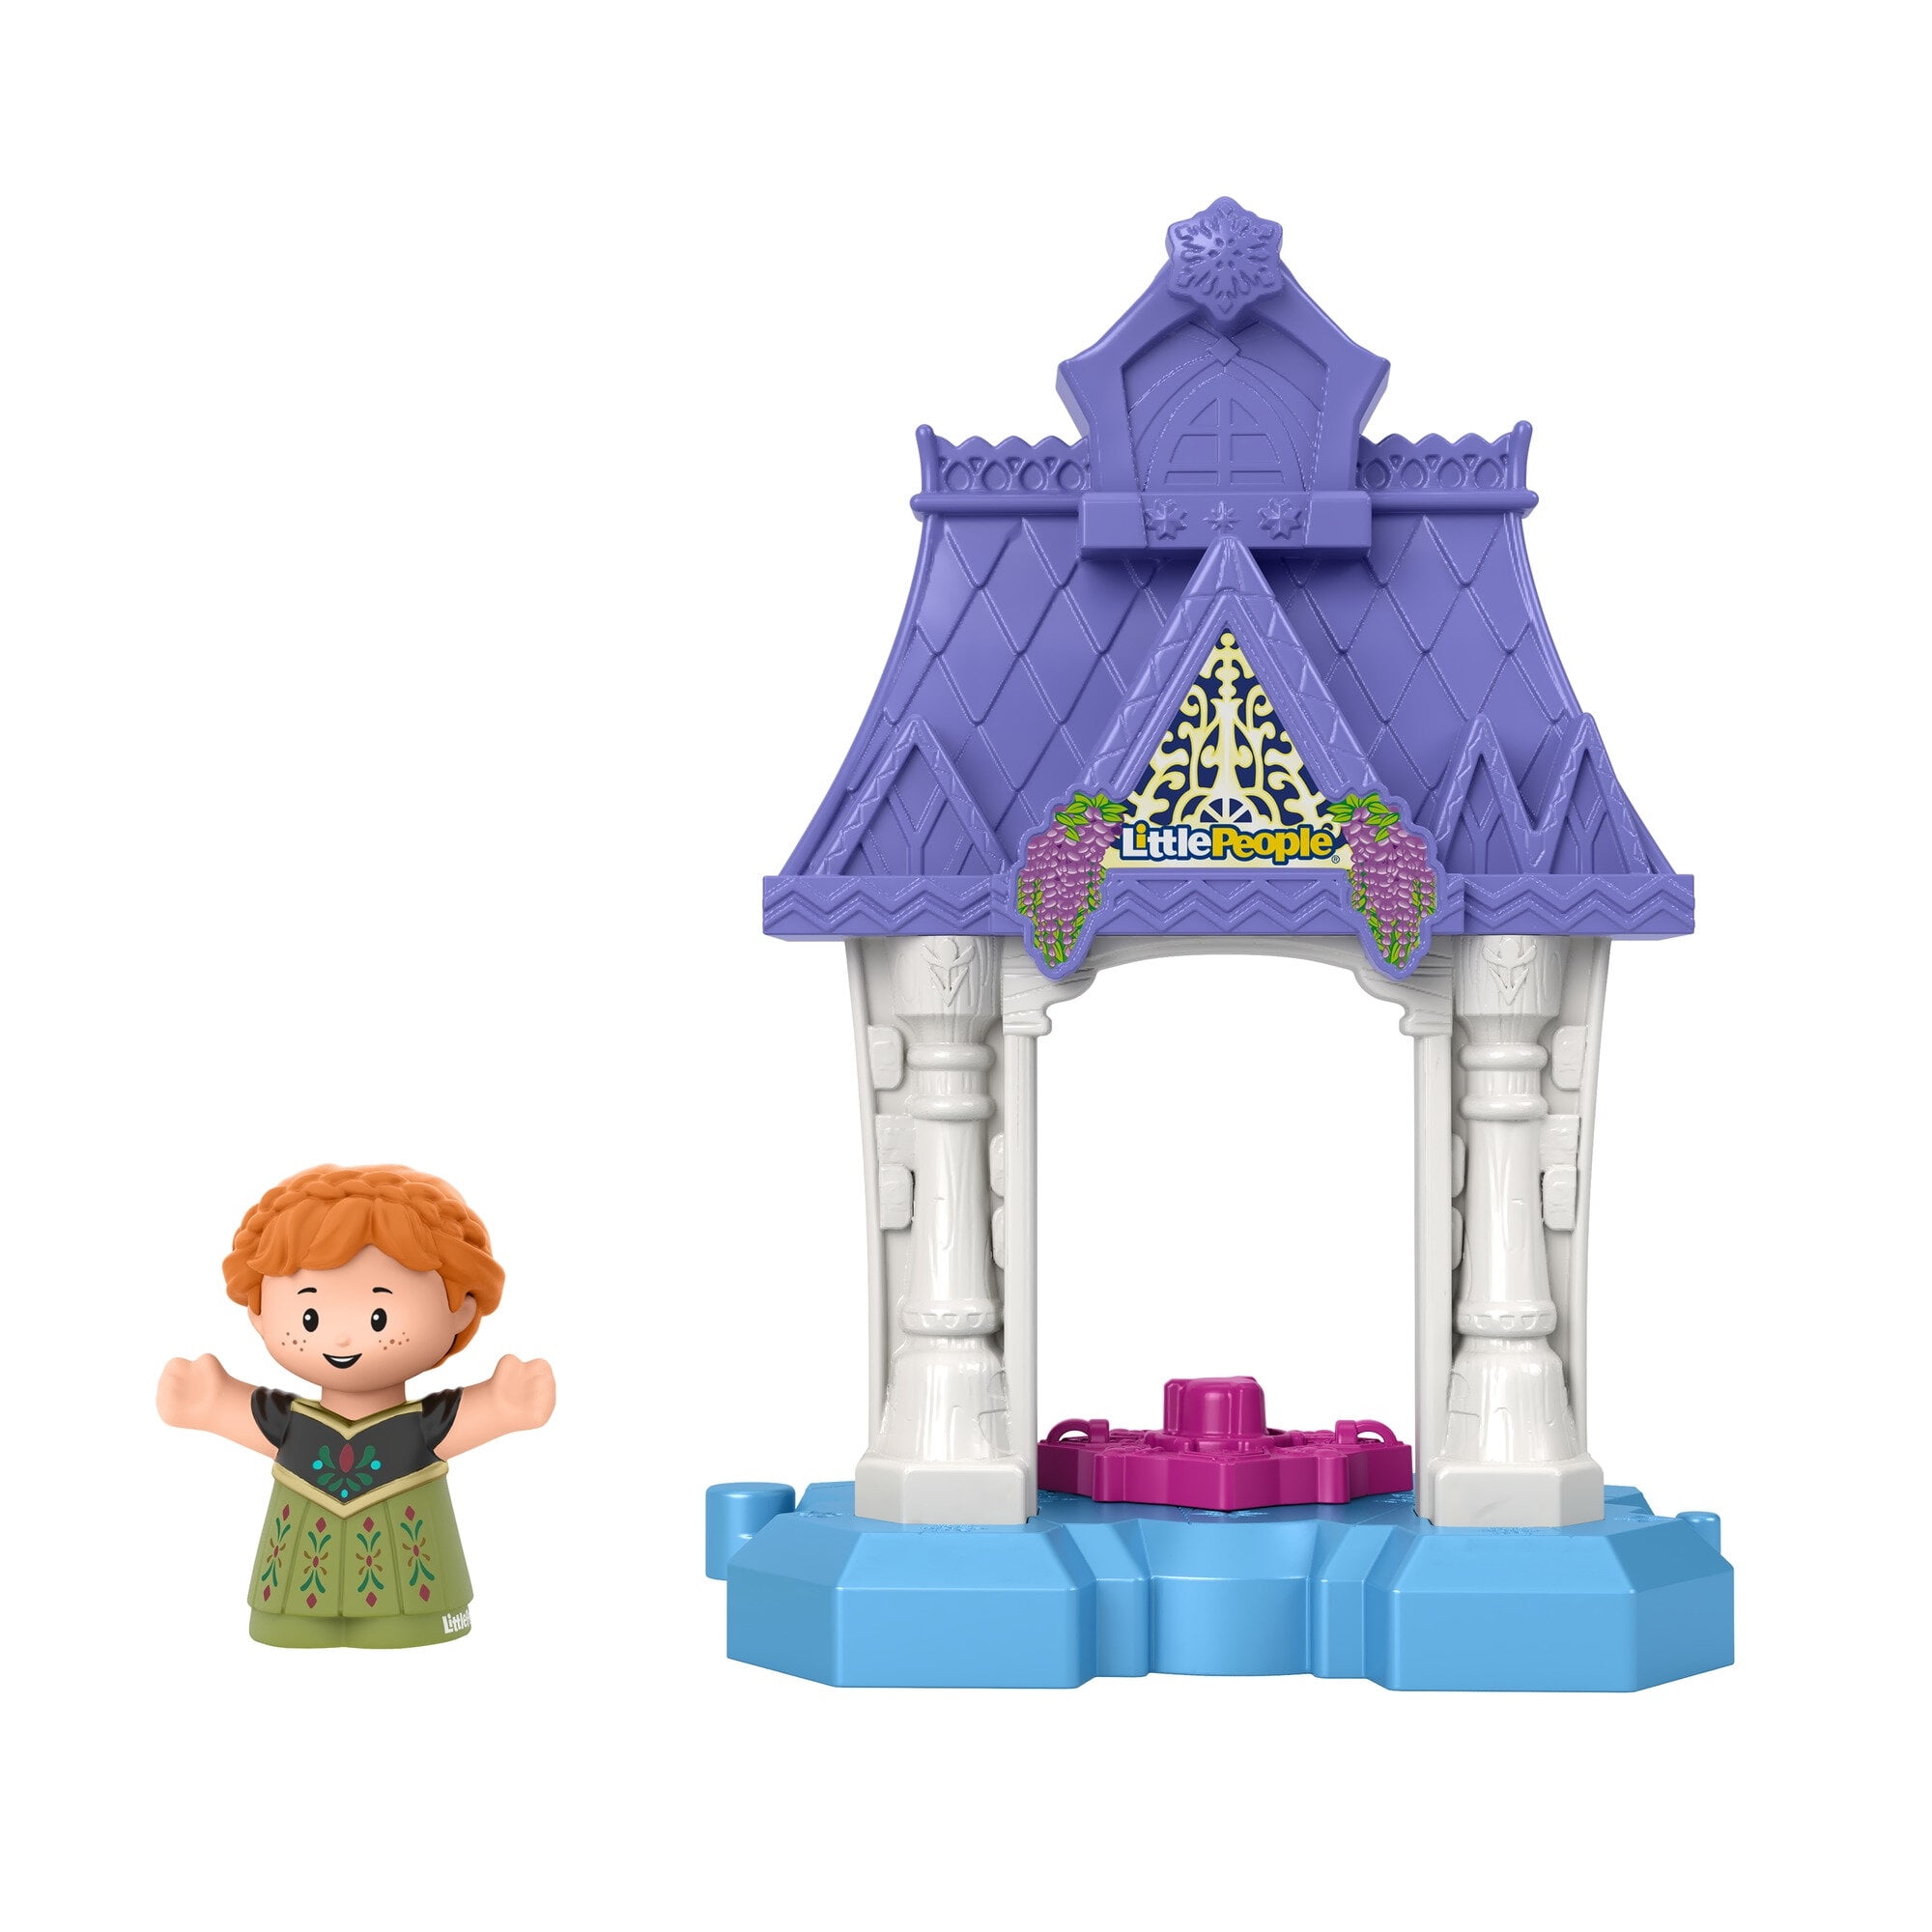 Disney Frozen Anna in Arendelle Playset By Little People